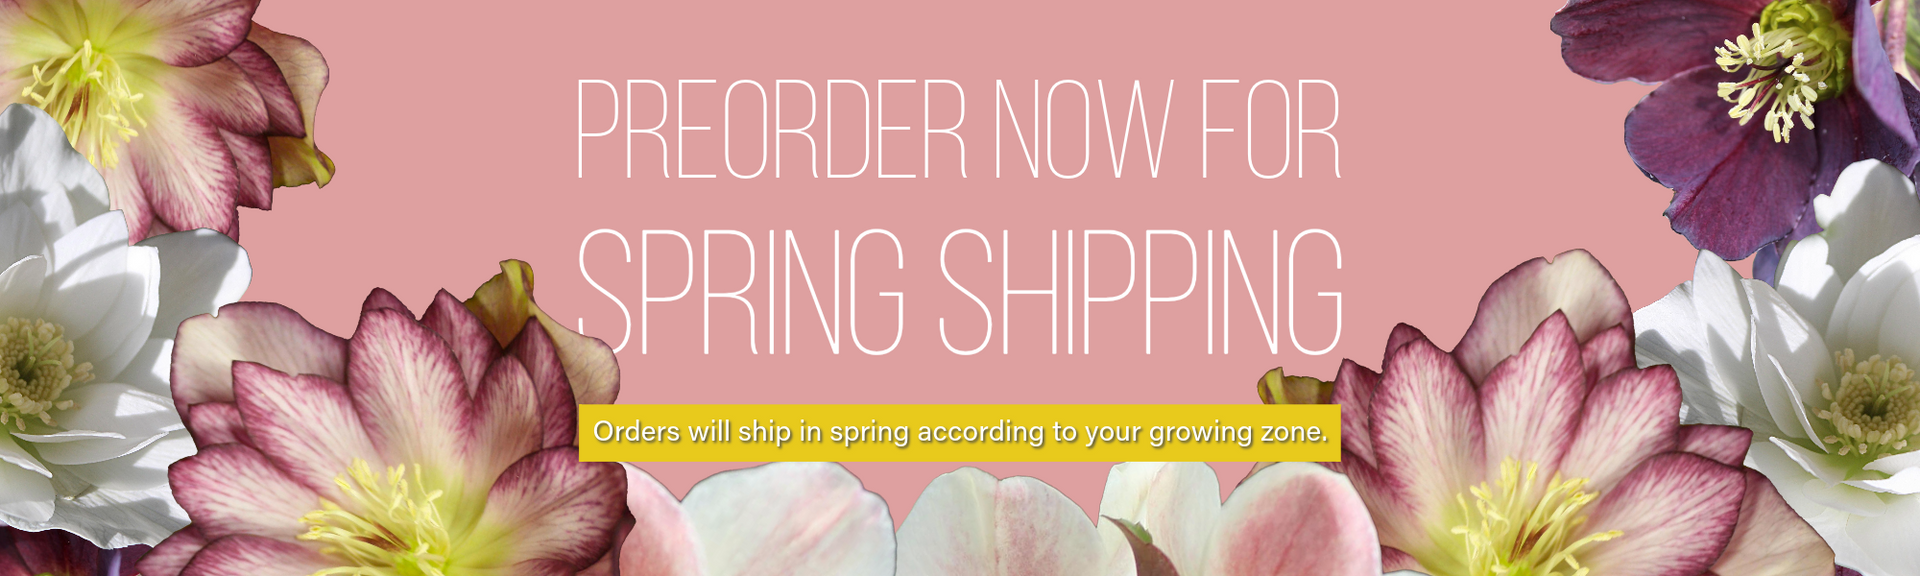 Preorder now for spring shipping. Orders will ship in spring of 2024 according to your growing zone.